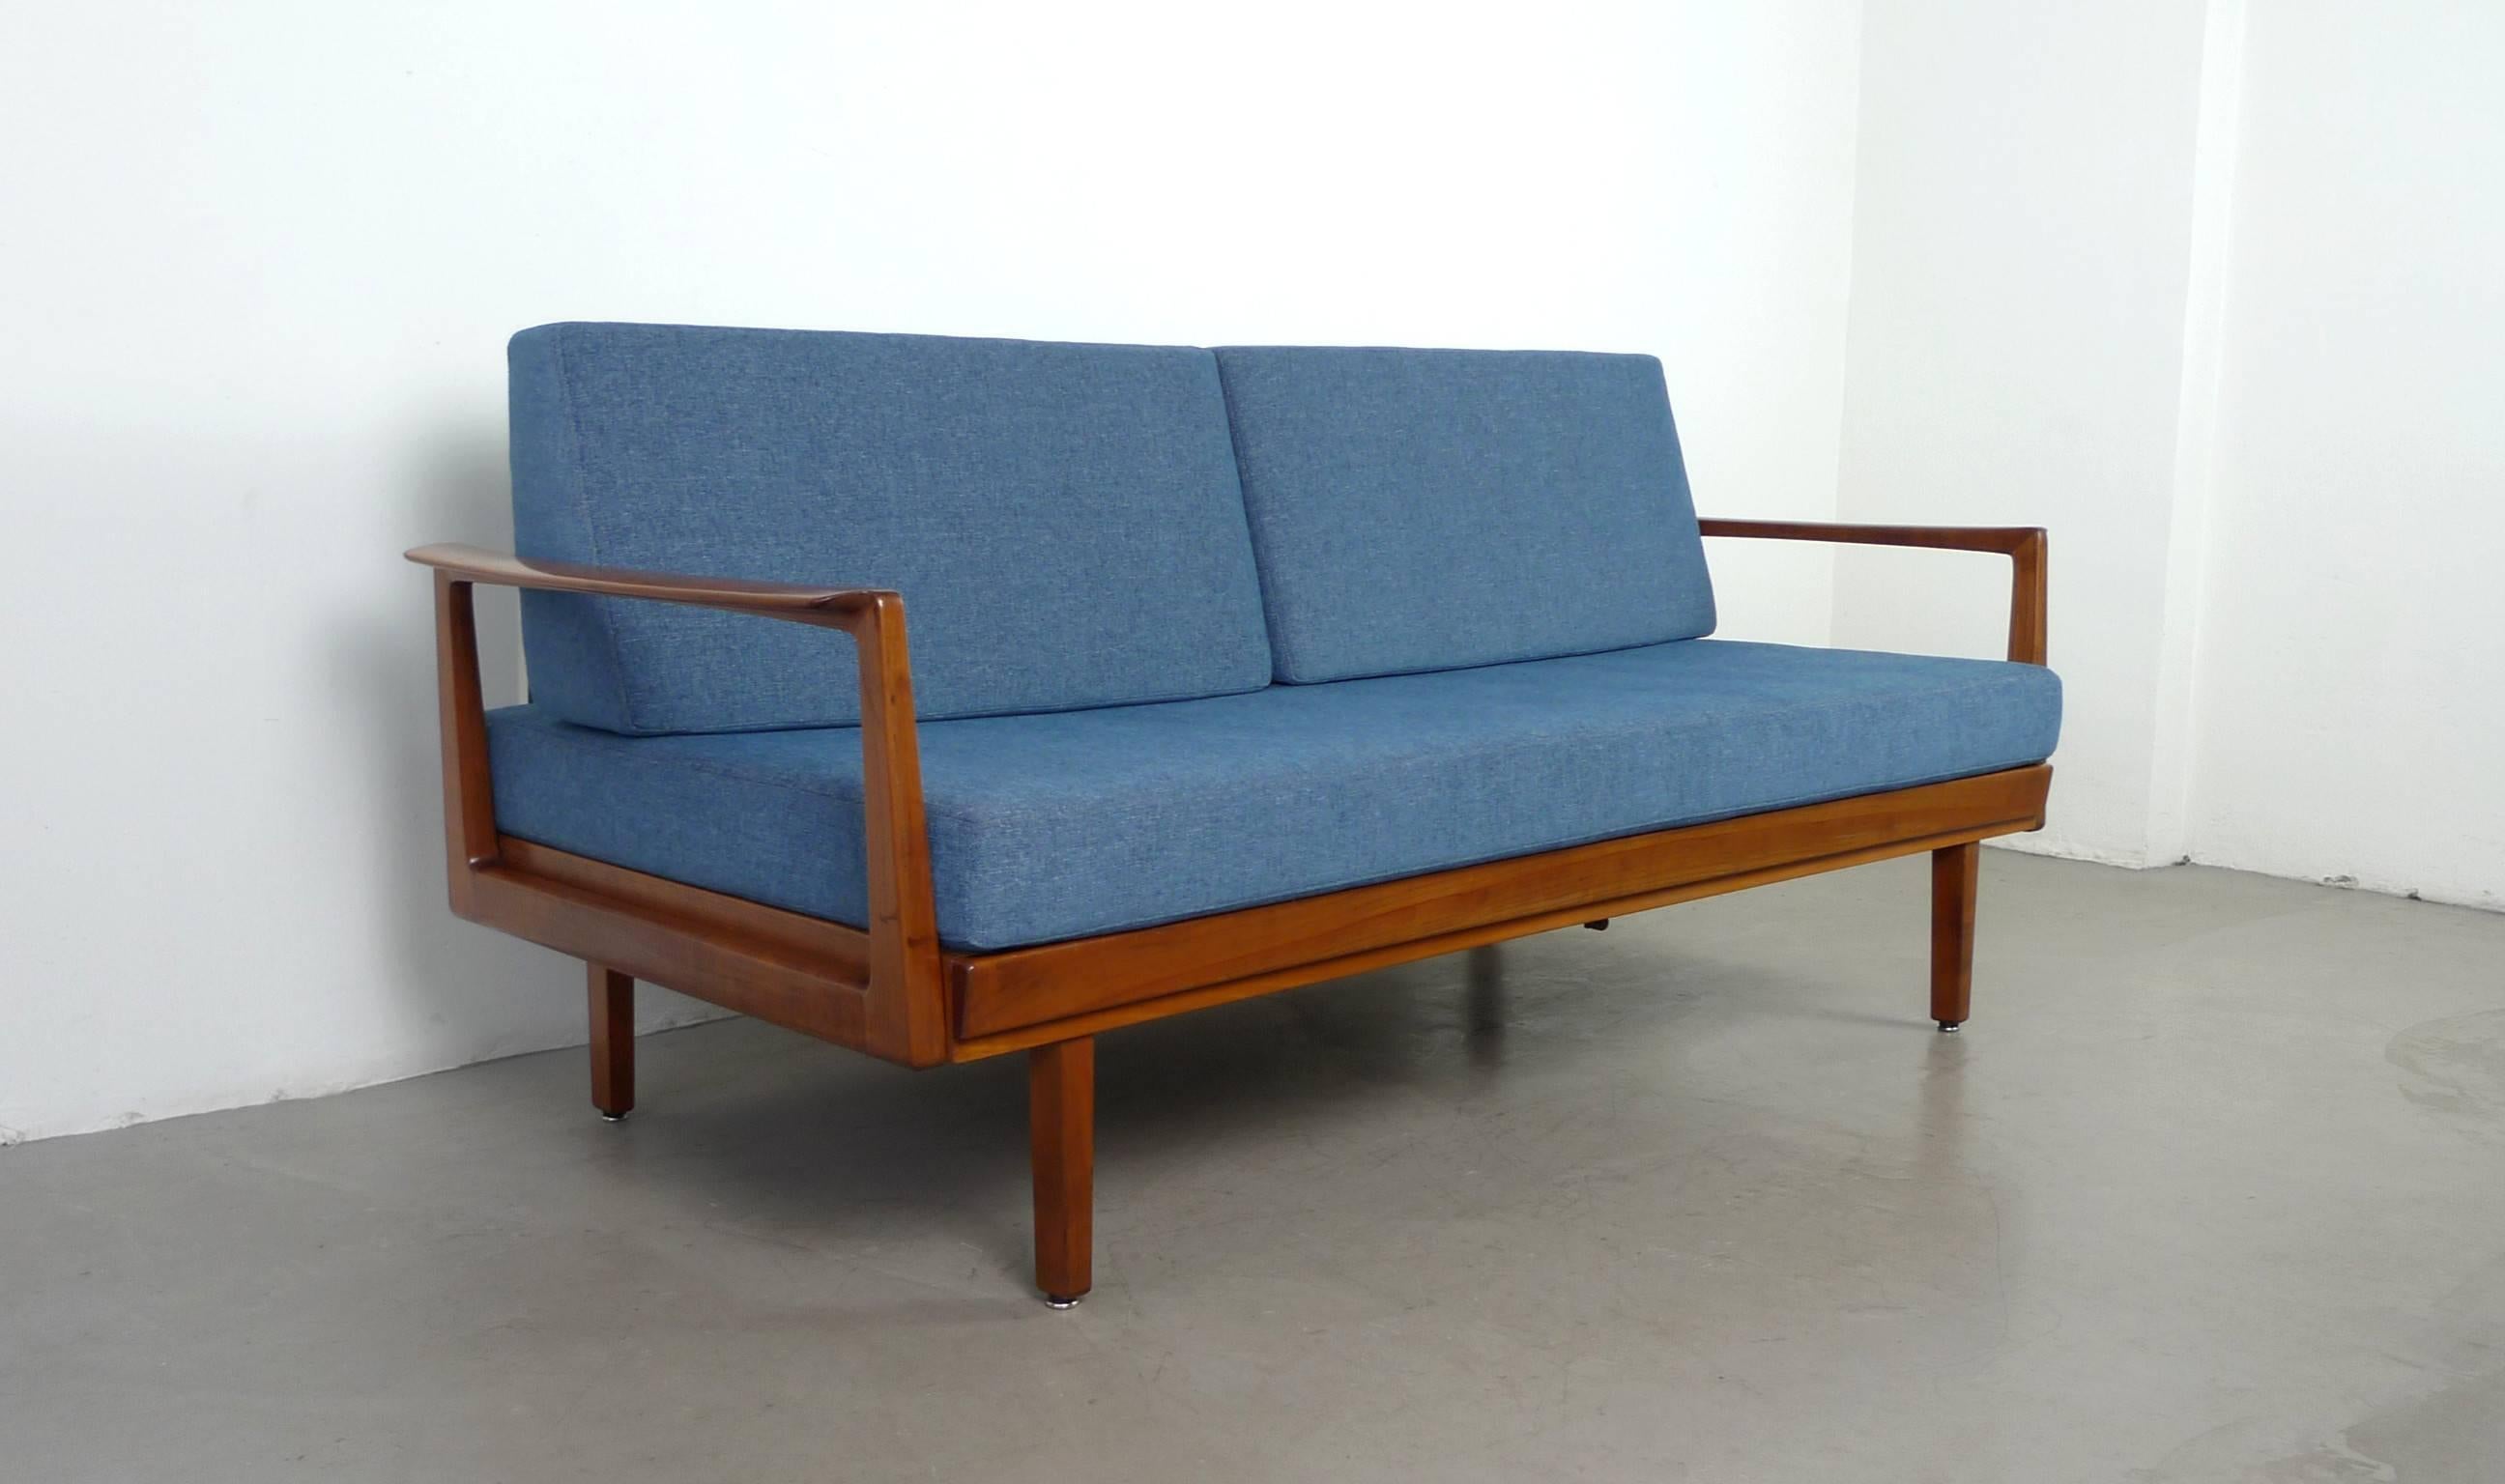 The German manufacturer Walter Knoll designed and produced this daybed in the 1950s. It has a walnut frame and a blue fabric cover.
By pulling out the left armrest one of the backrest cushions fills the gap for relaxing or sleeping. The extended